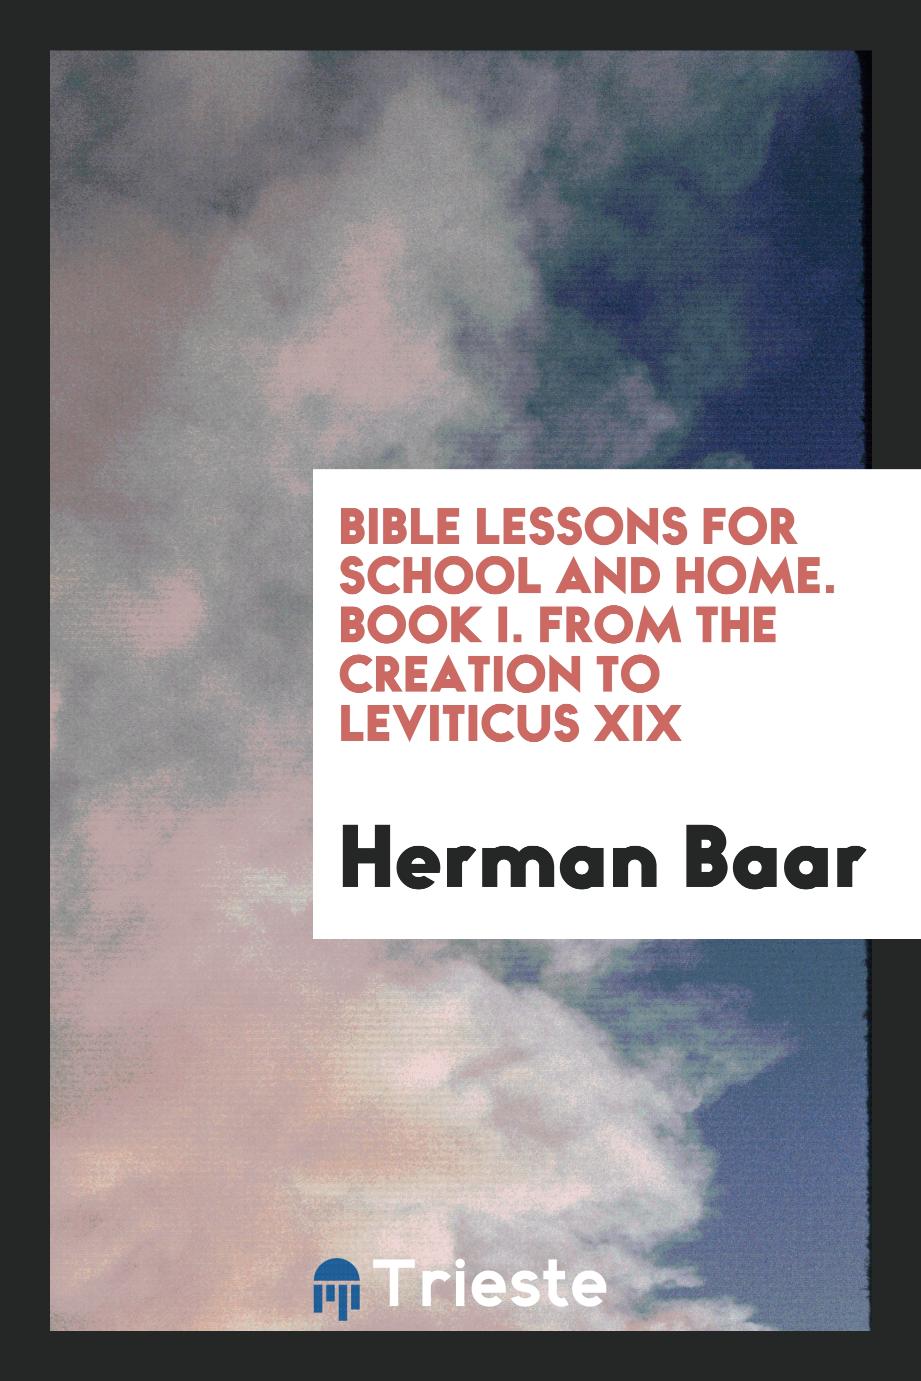 Bible Lessons for School and Home. Book I. From the Creation to Leviticus XIX